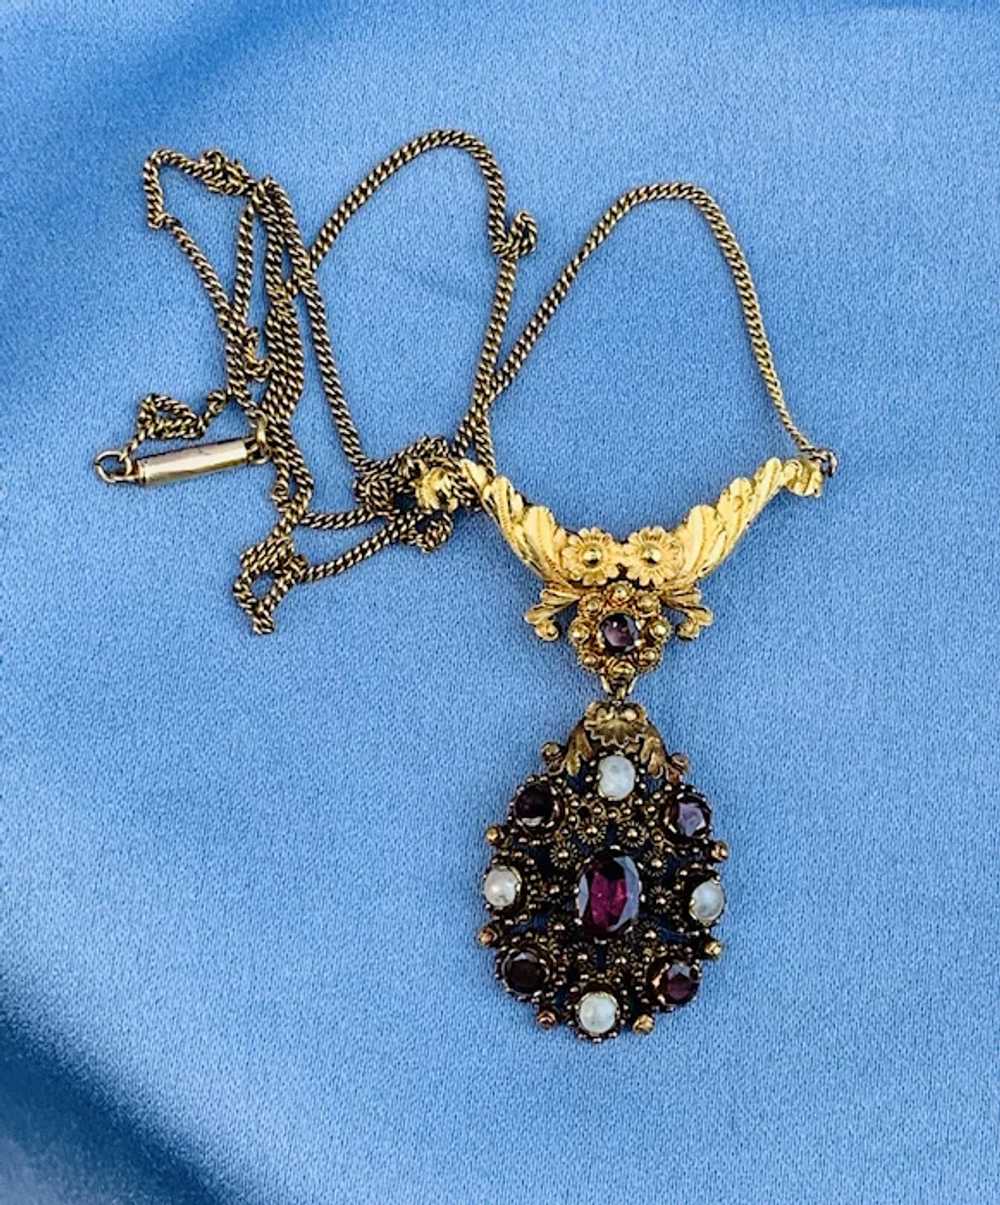 Garnet and Pearl Pendant/Brooch, Early Victorian - image 3